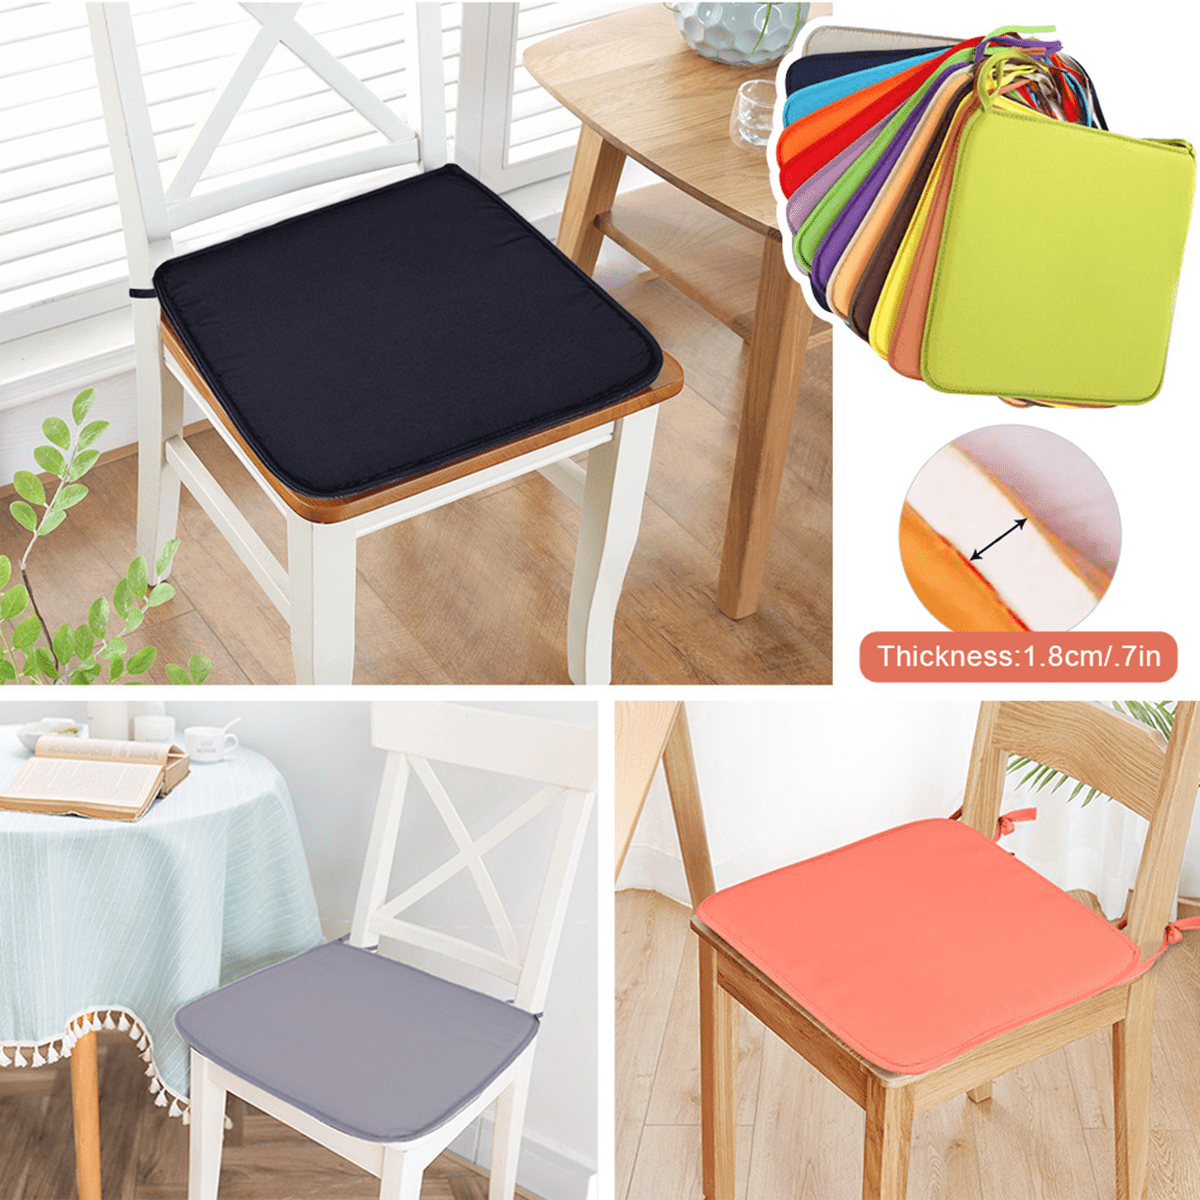 Soft Cushion Office Chair Garden Indoor Dining Seat Pad Tie On Square Foam Patio 